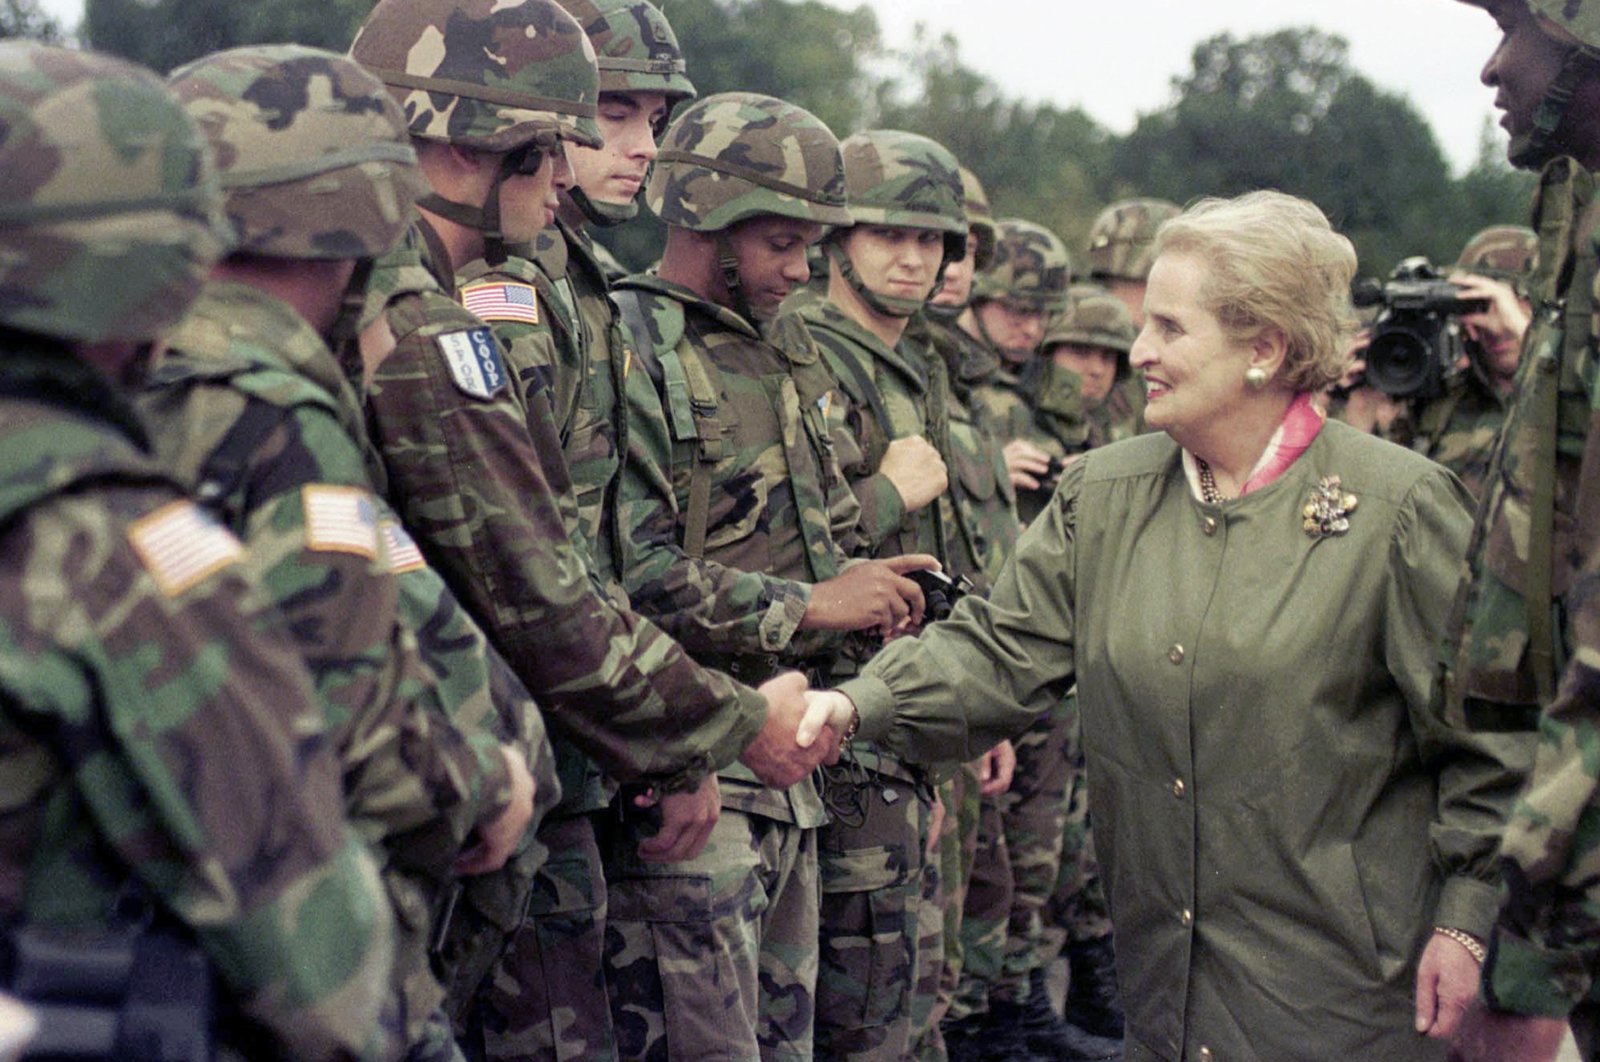 U.S. Secretary of State Madeleine Albright shakes hands with U..S soldiers during her visit to Air Base Eagle near Tuzla, Bosnia-Herzegovina, Aug. 30, 1998. (AP Photo)